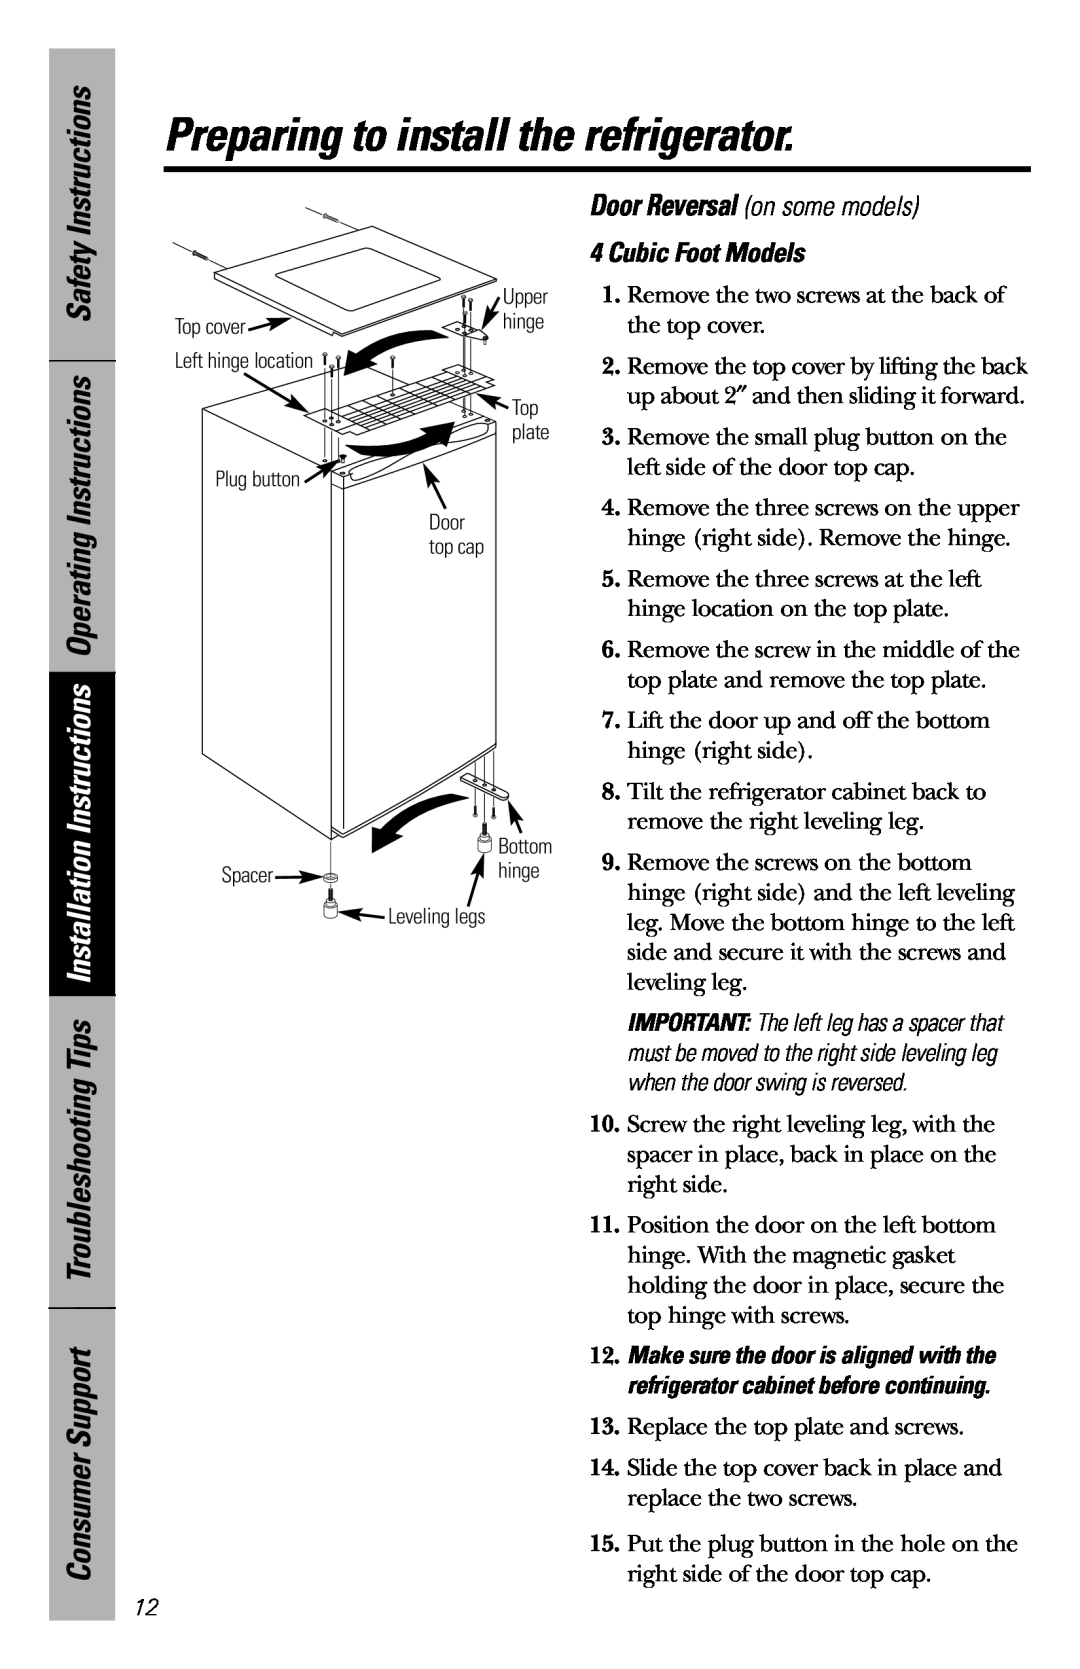 GE 4 Cubic Foot Models Instructions, Consumer, Preparing to install the refrigerator, Door Reversal on some models 